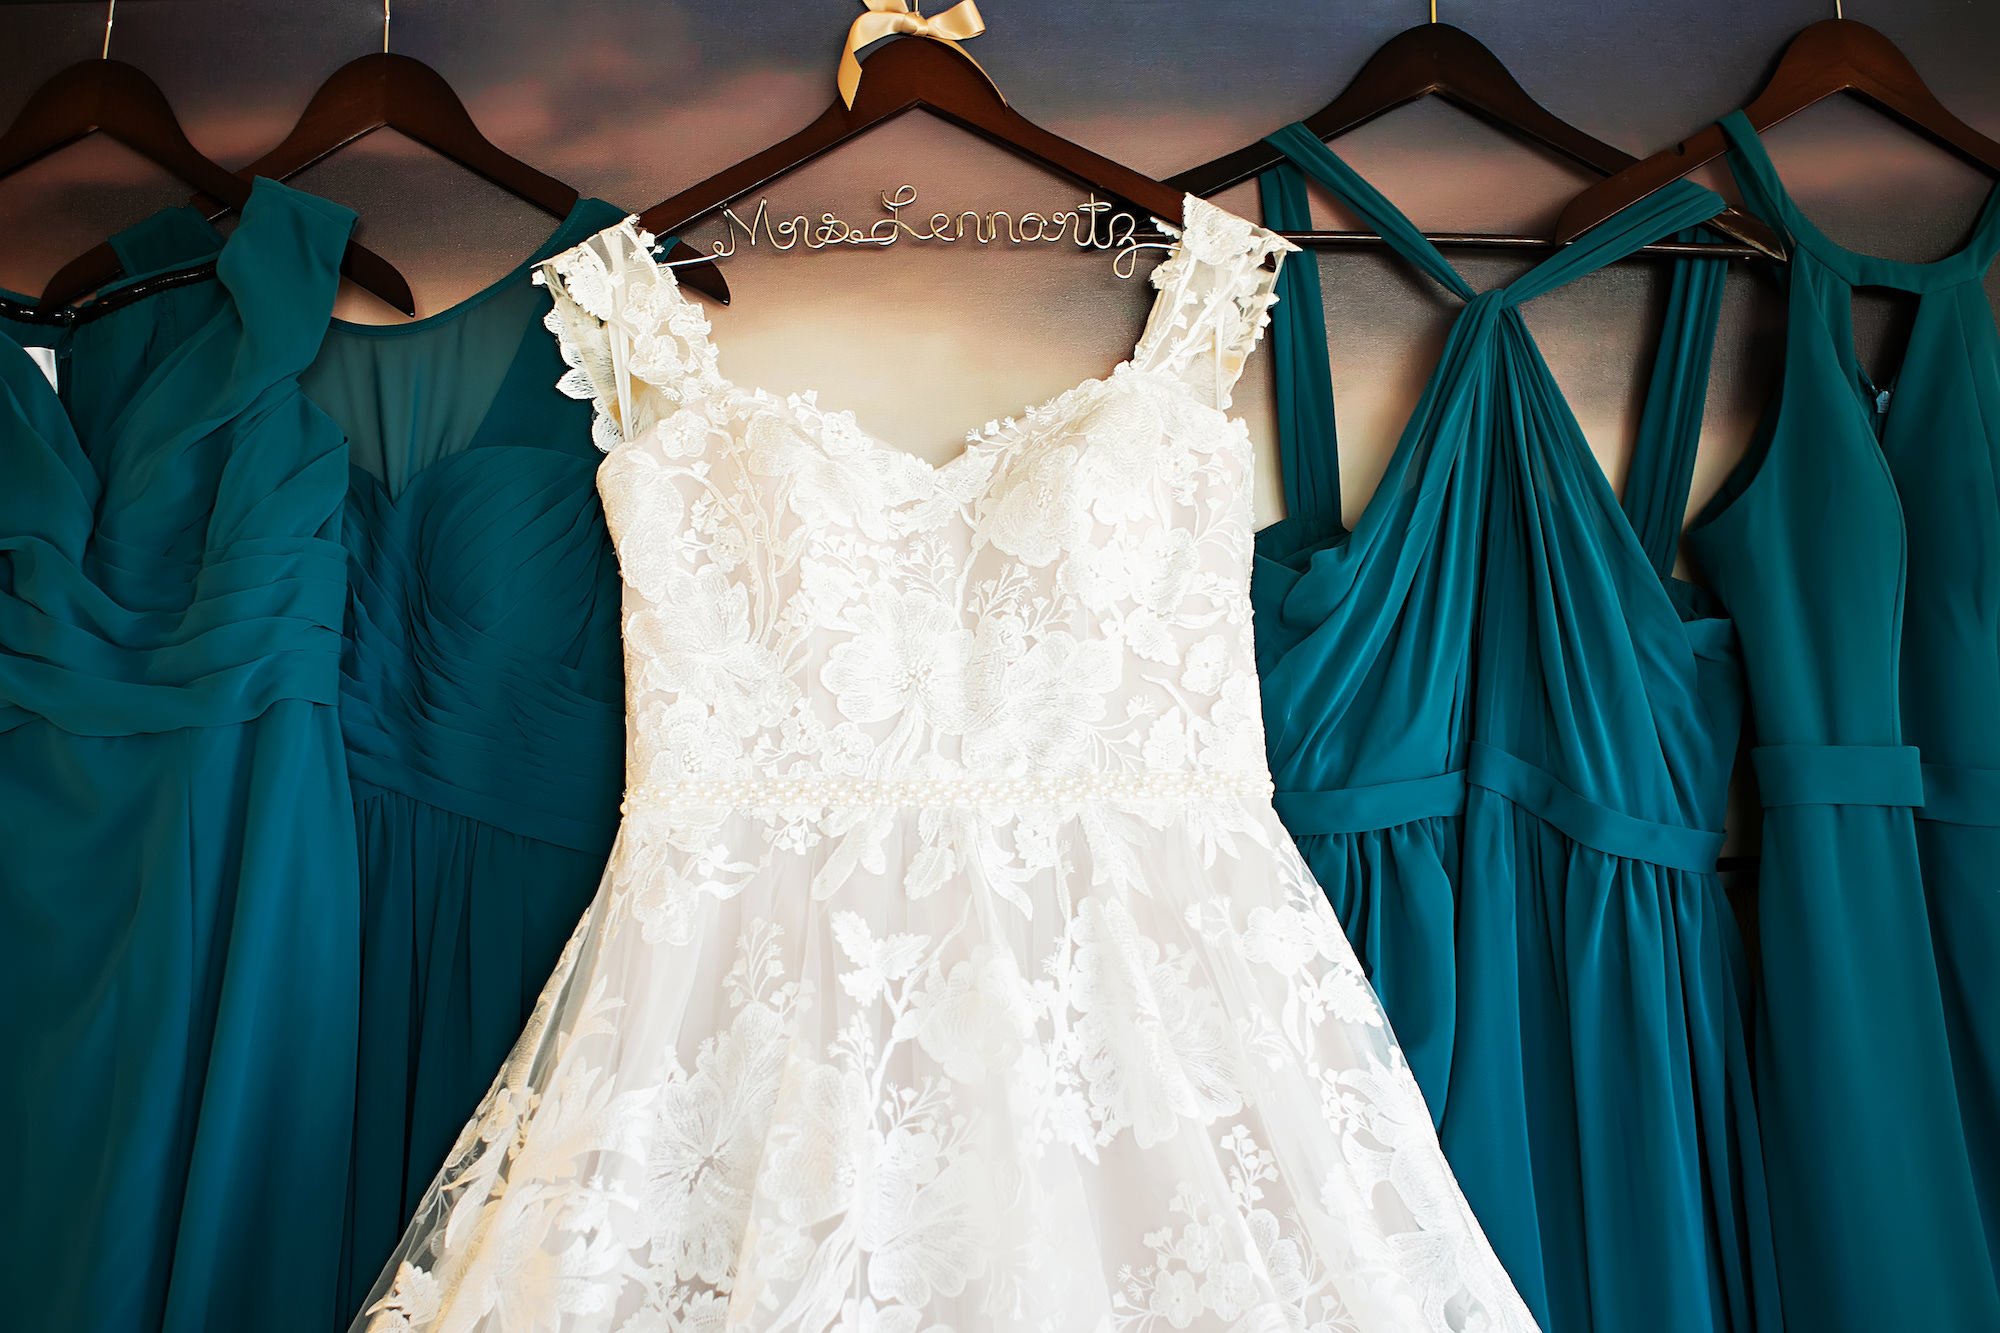 Lace Wedding Ballgown Hanging Next to Teal Bridesmaids Dresses Wedding Portrait | Tampa Photographer Limelight Photography